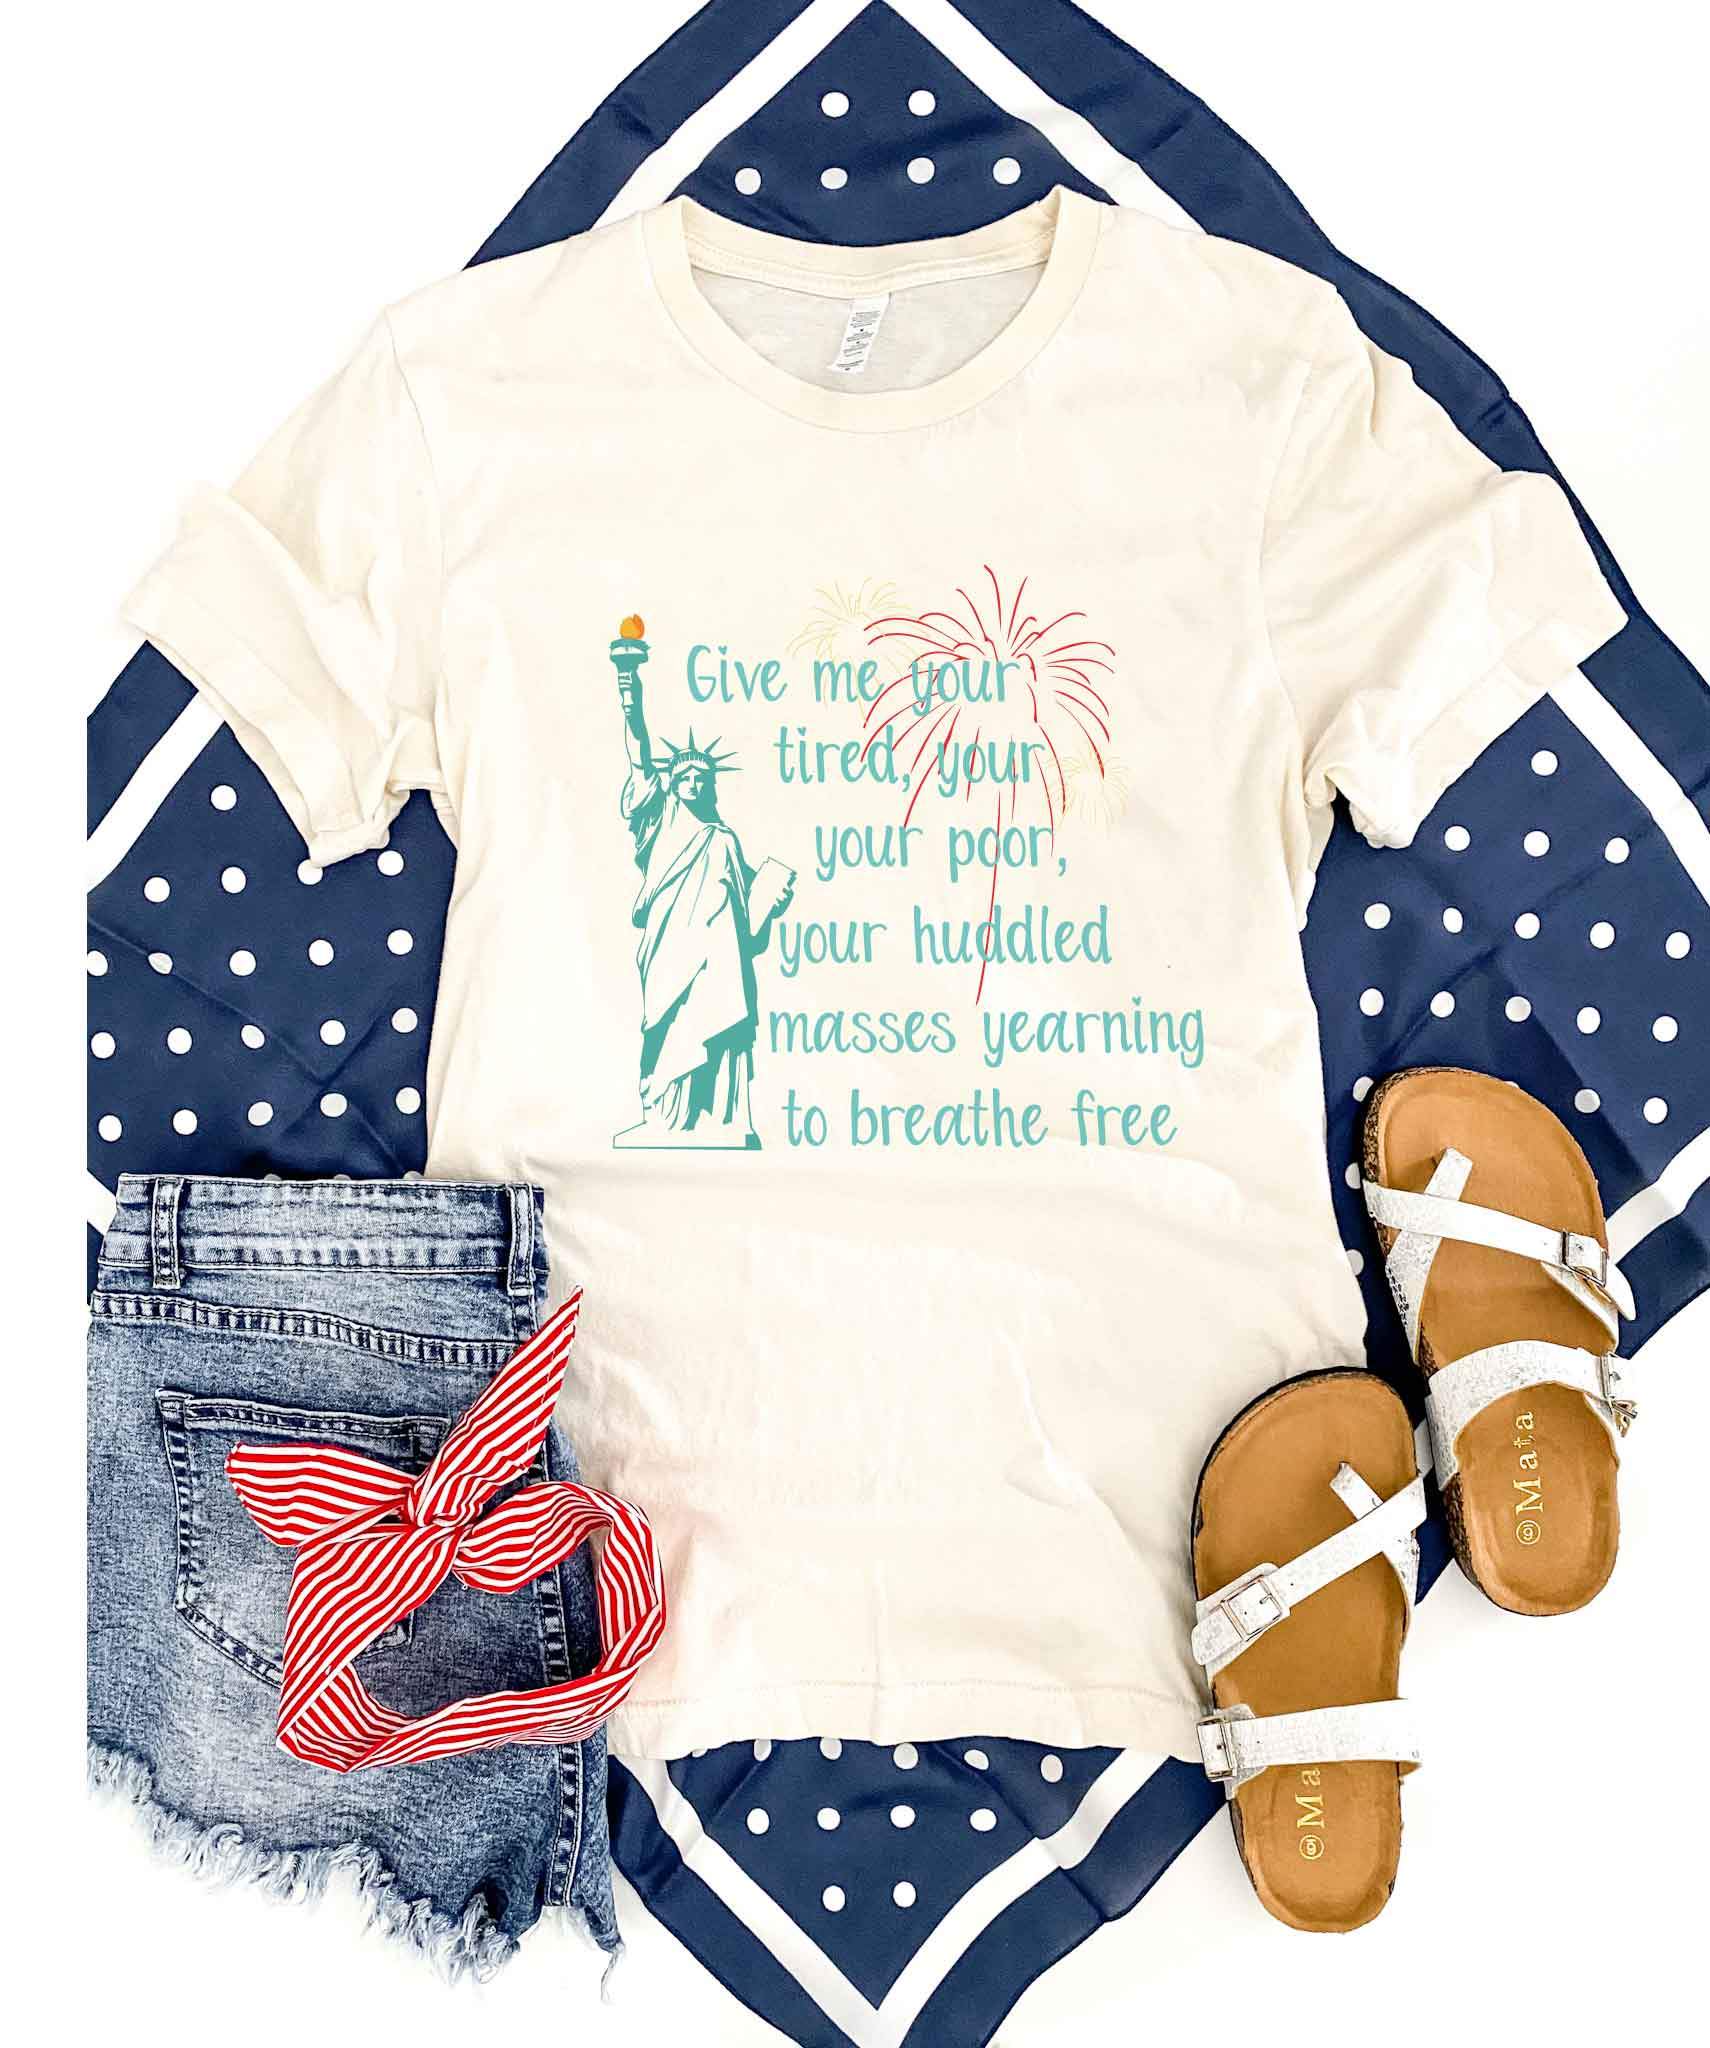 Give me your tired tee Short sleeve patriotic tee Bella Canvas 3001 